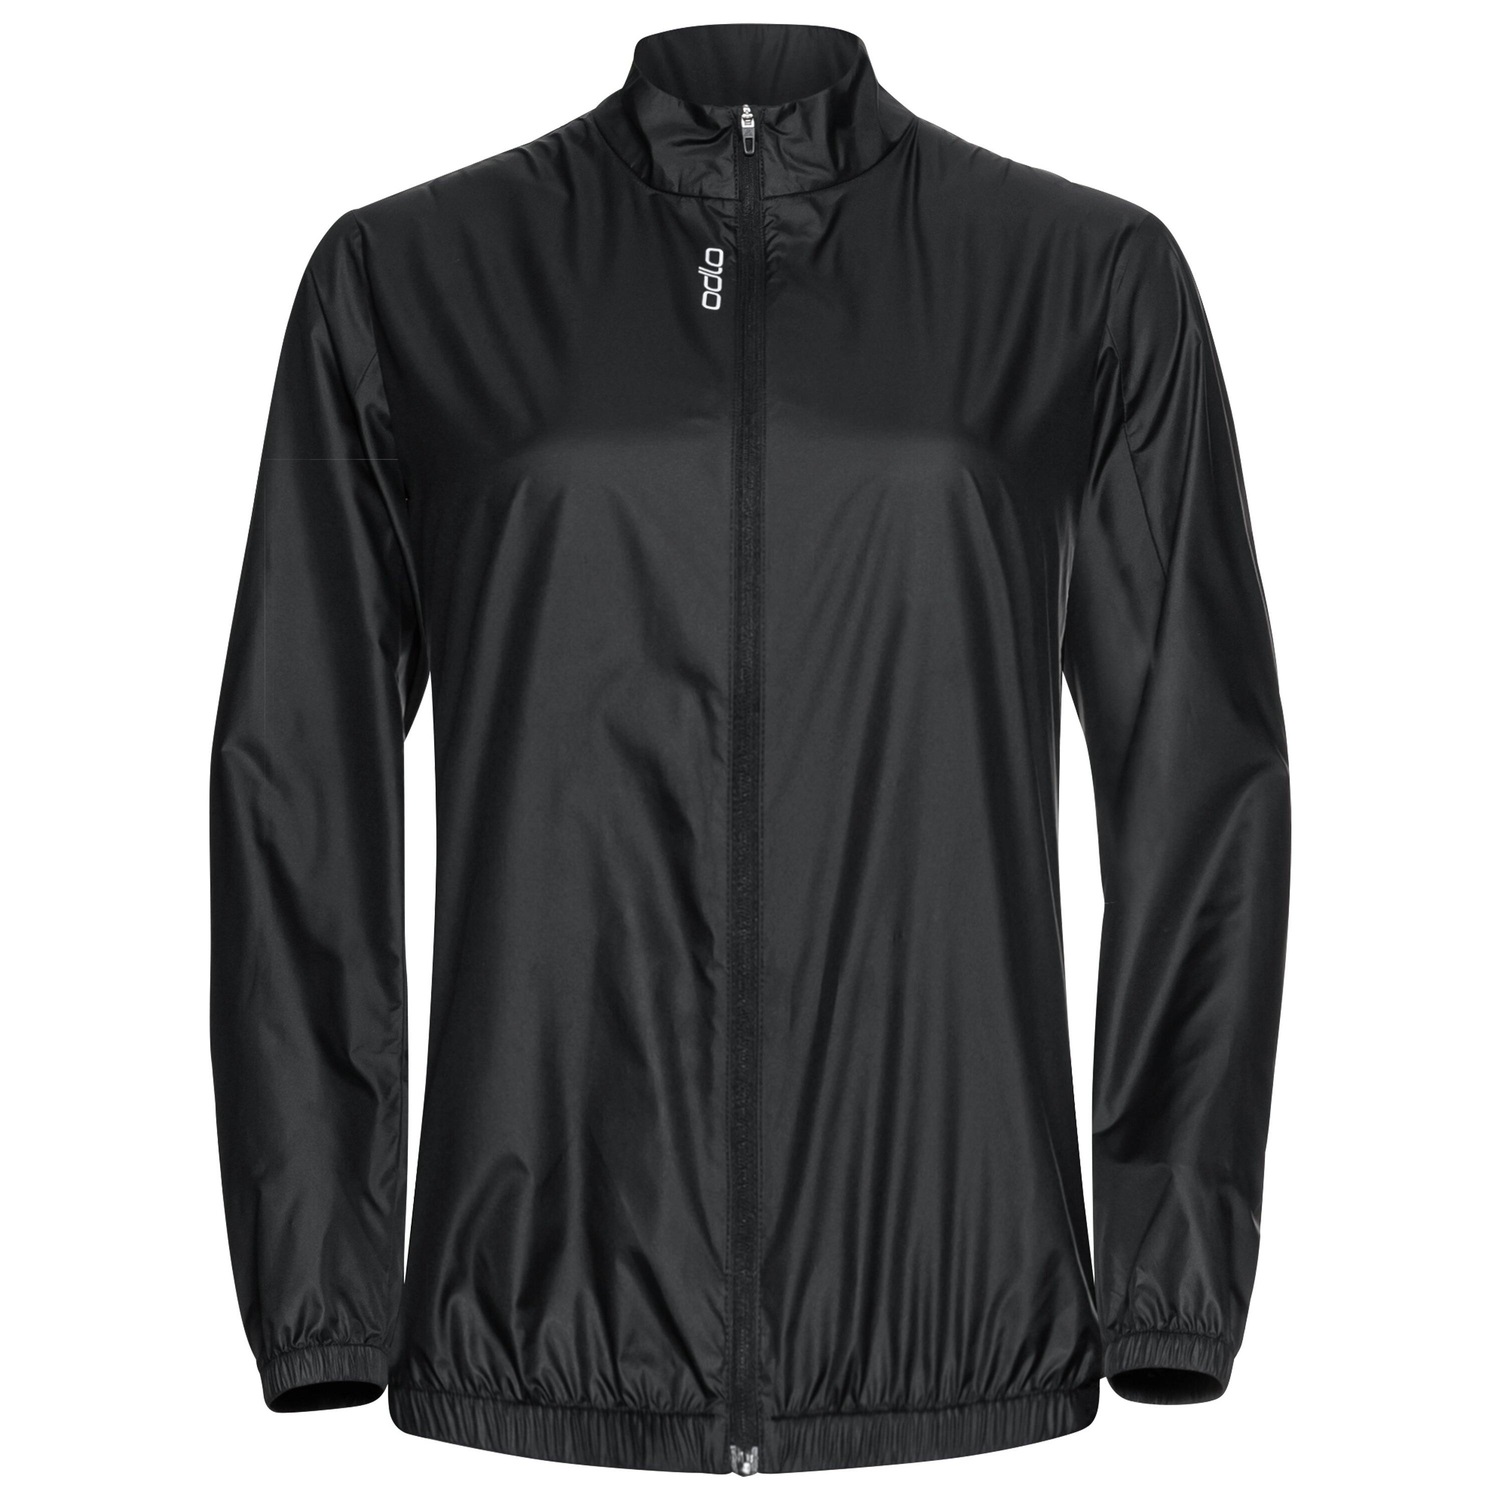 Picture of Odlo Essentials Cycling Jacket Women 411851 - black